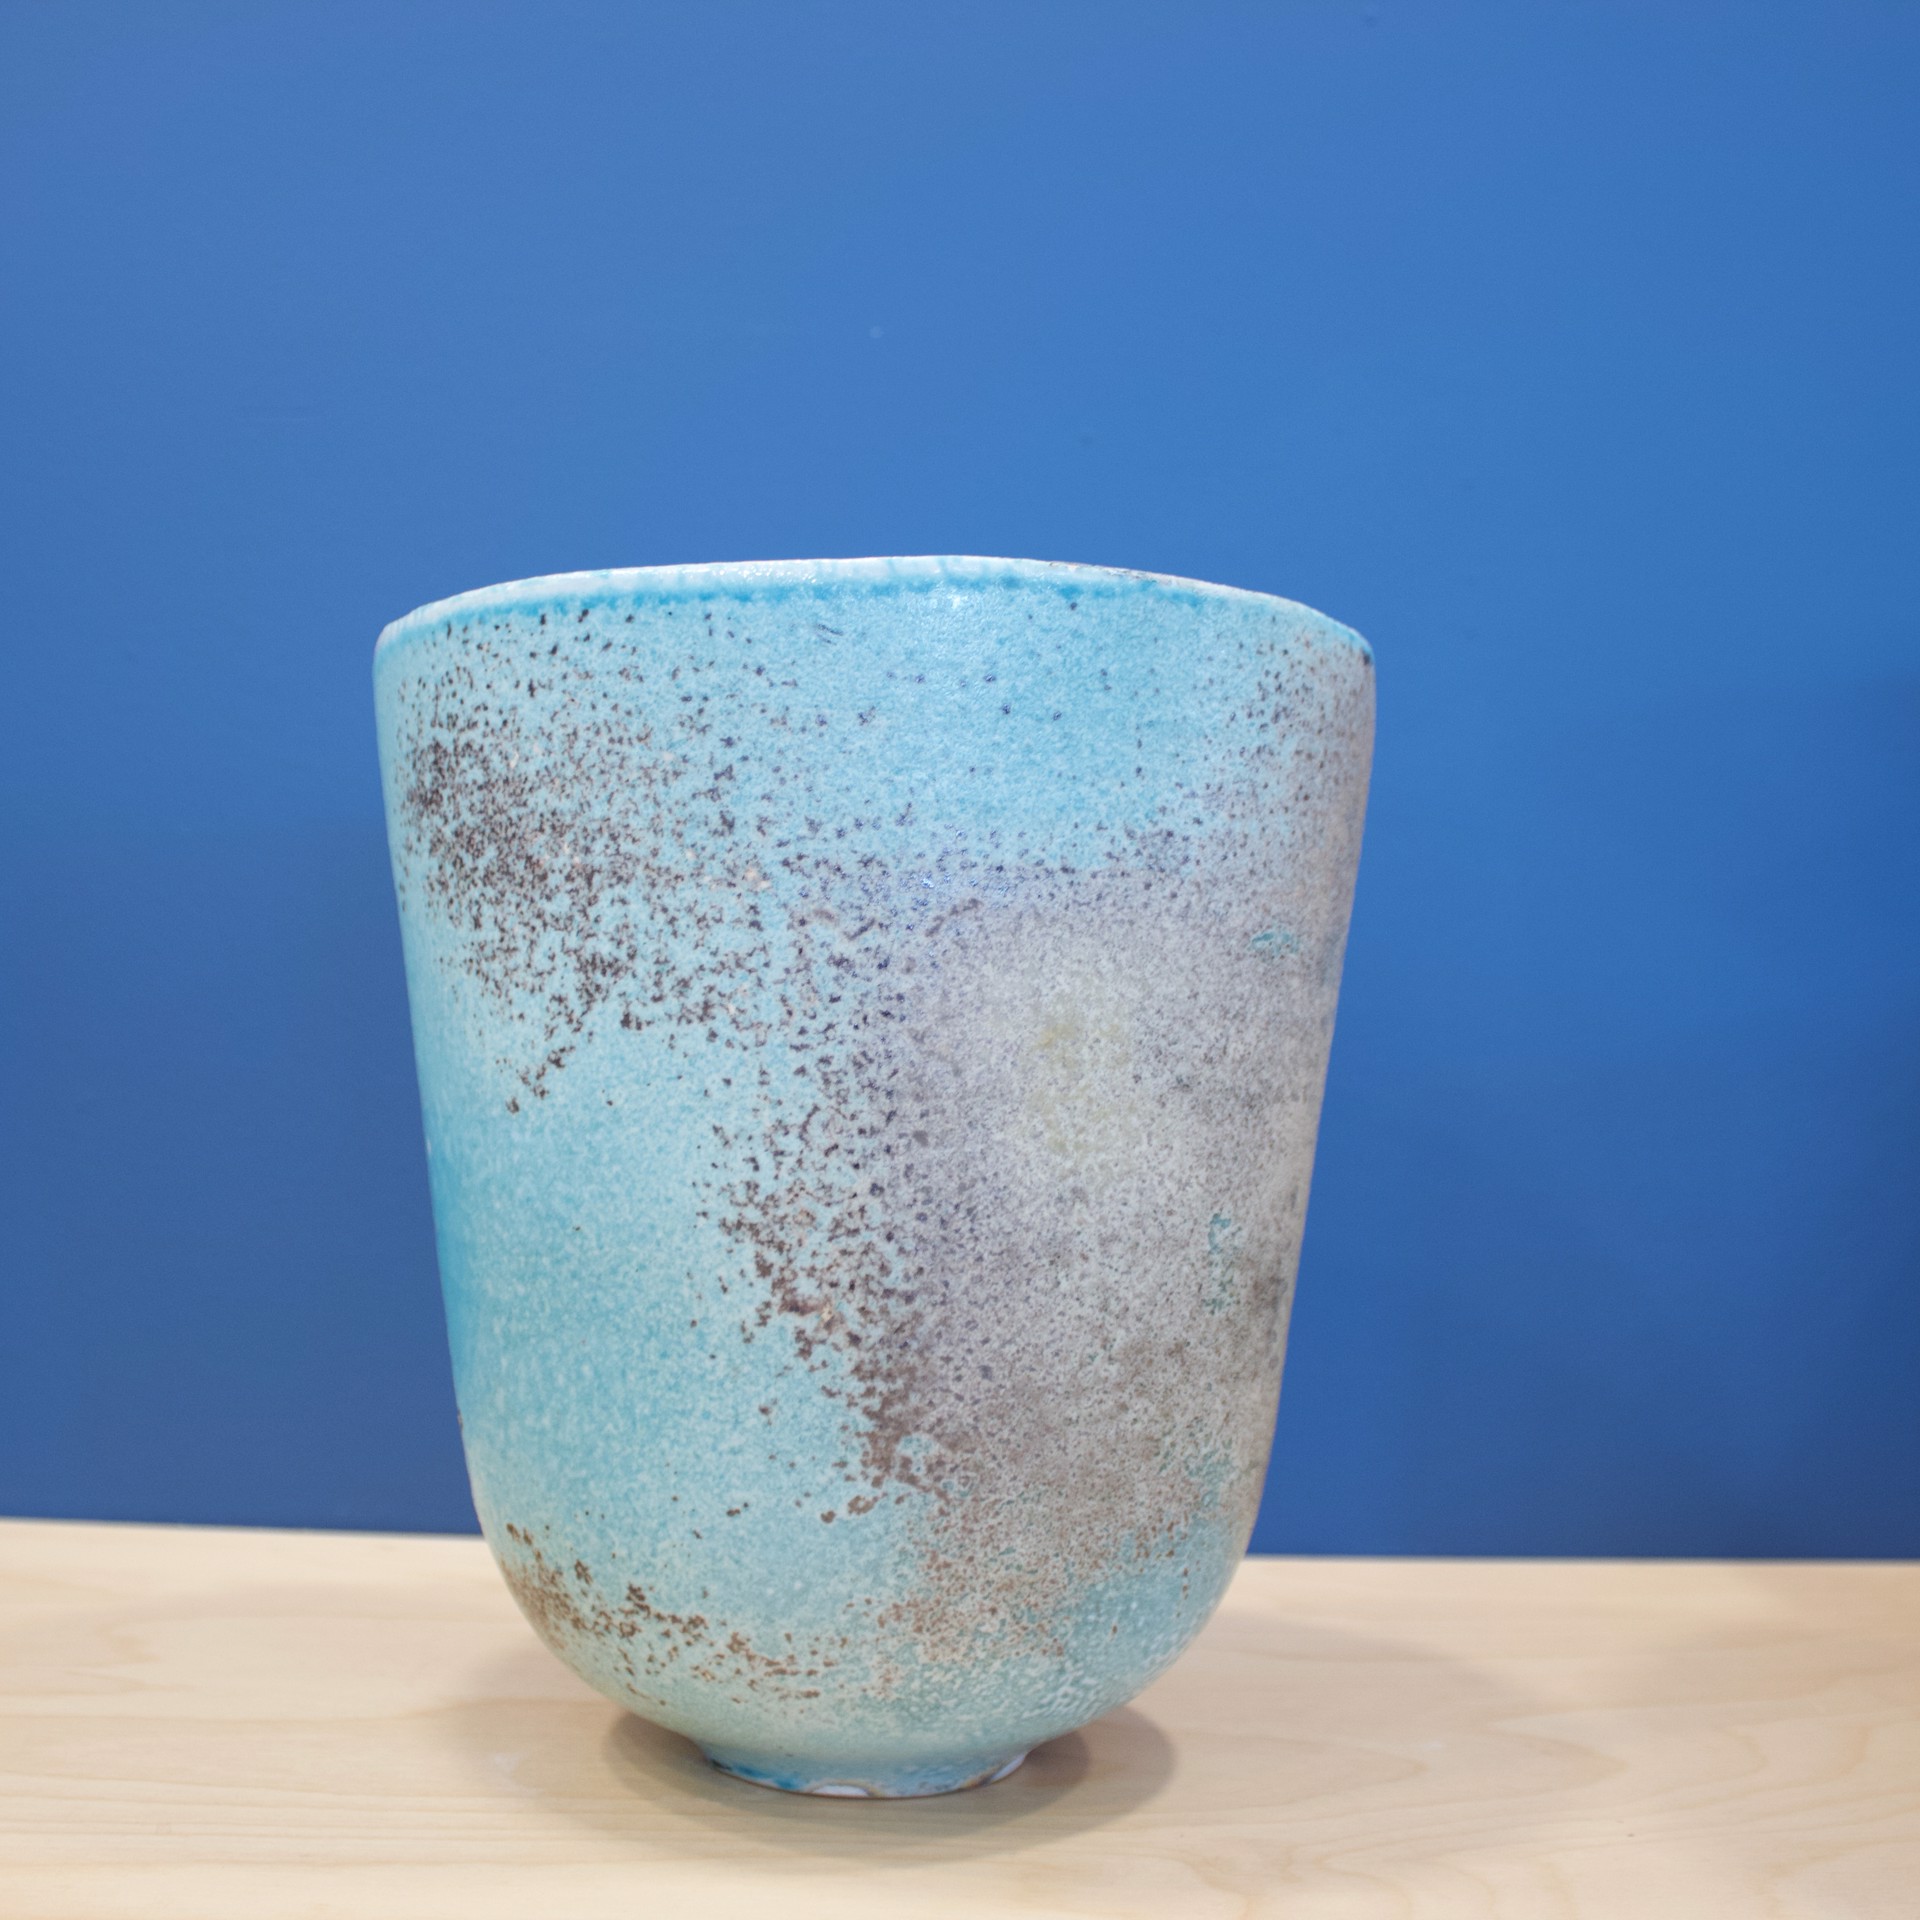 Tall Turquoise and Russet Conical Vessel by Jack Doherty